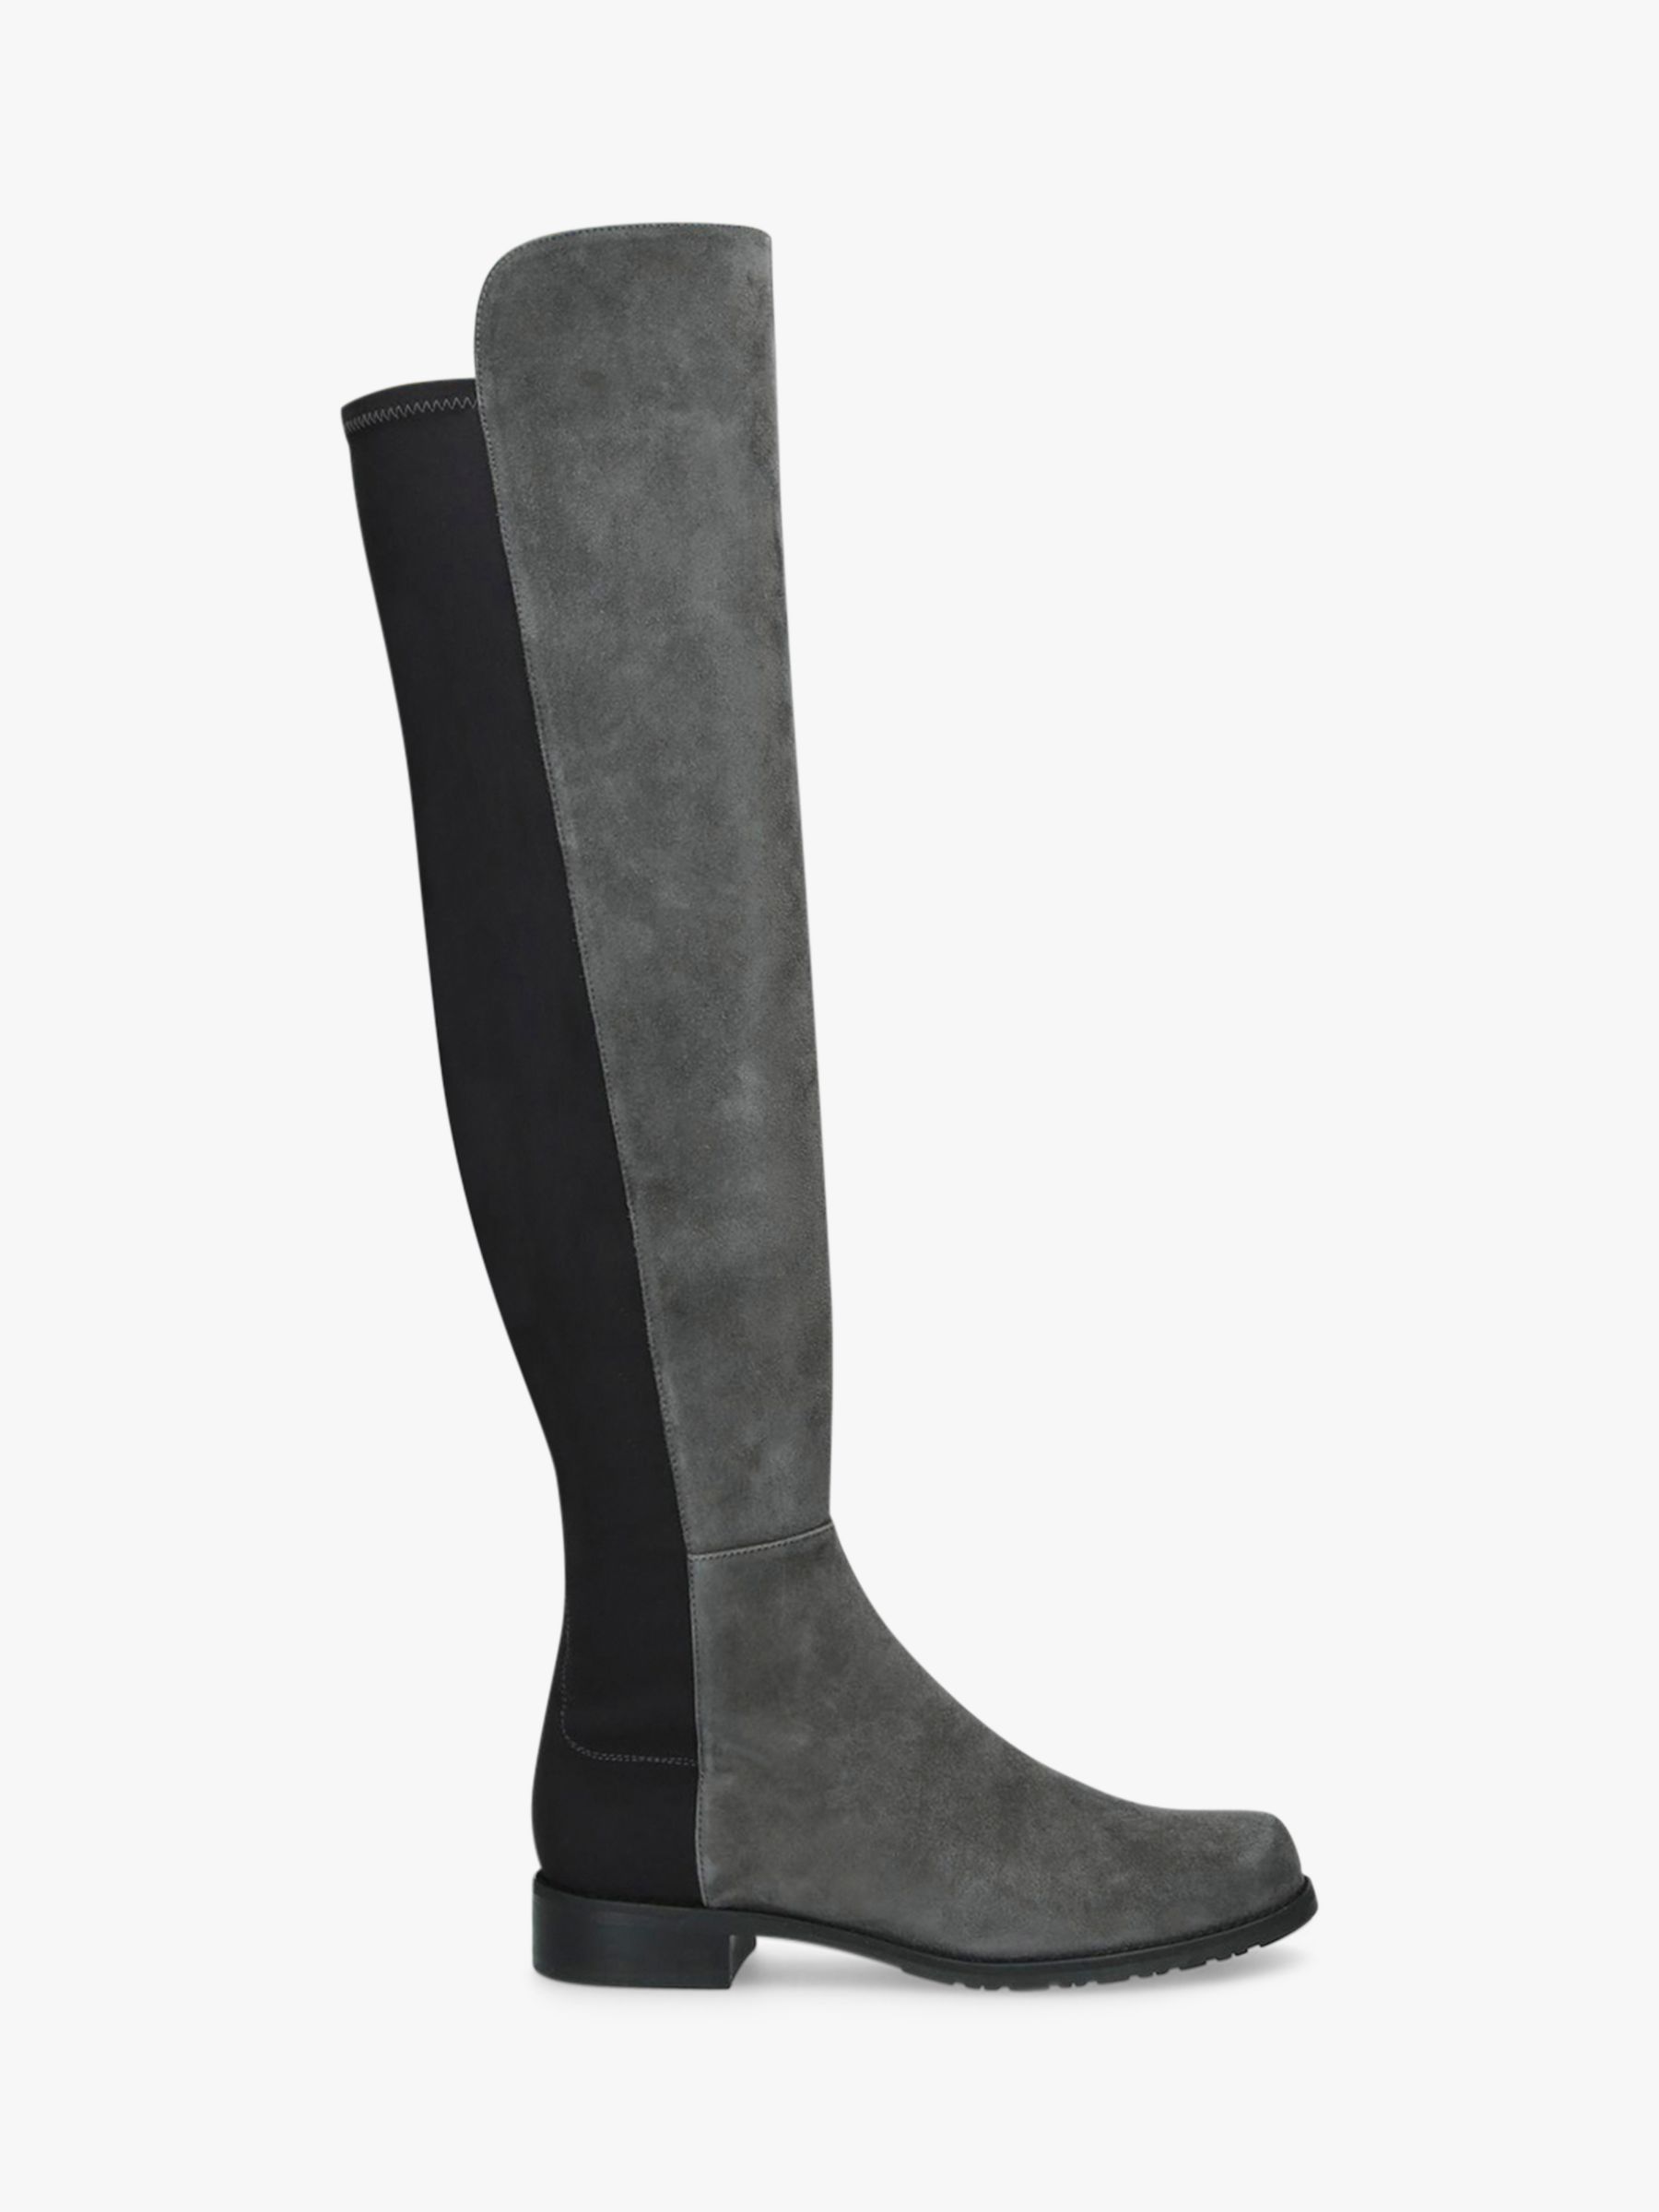 grey suede riding boots